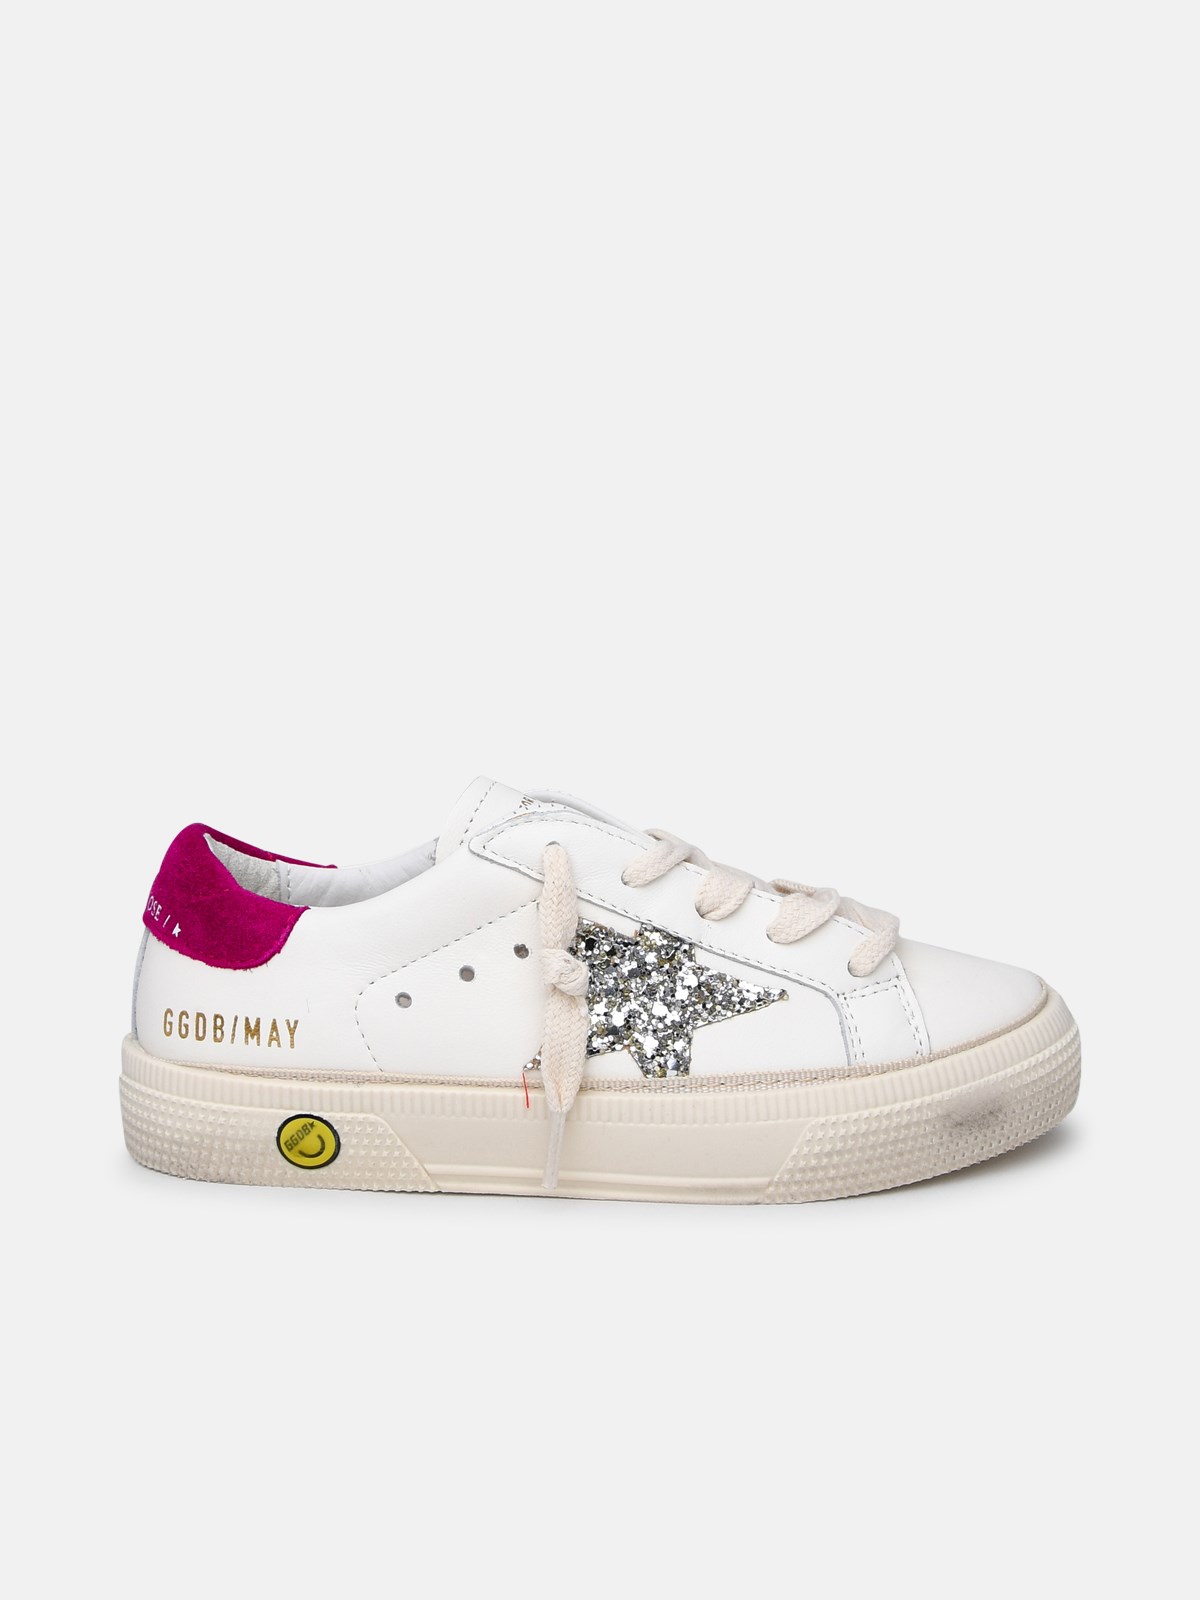 GOLDEN GOOSE MAY WHITE LEATHER SNEAKERS